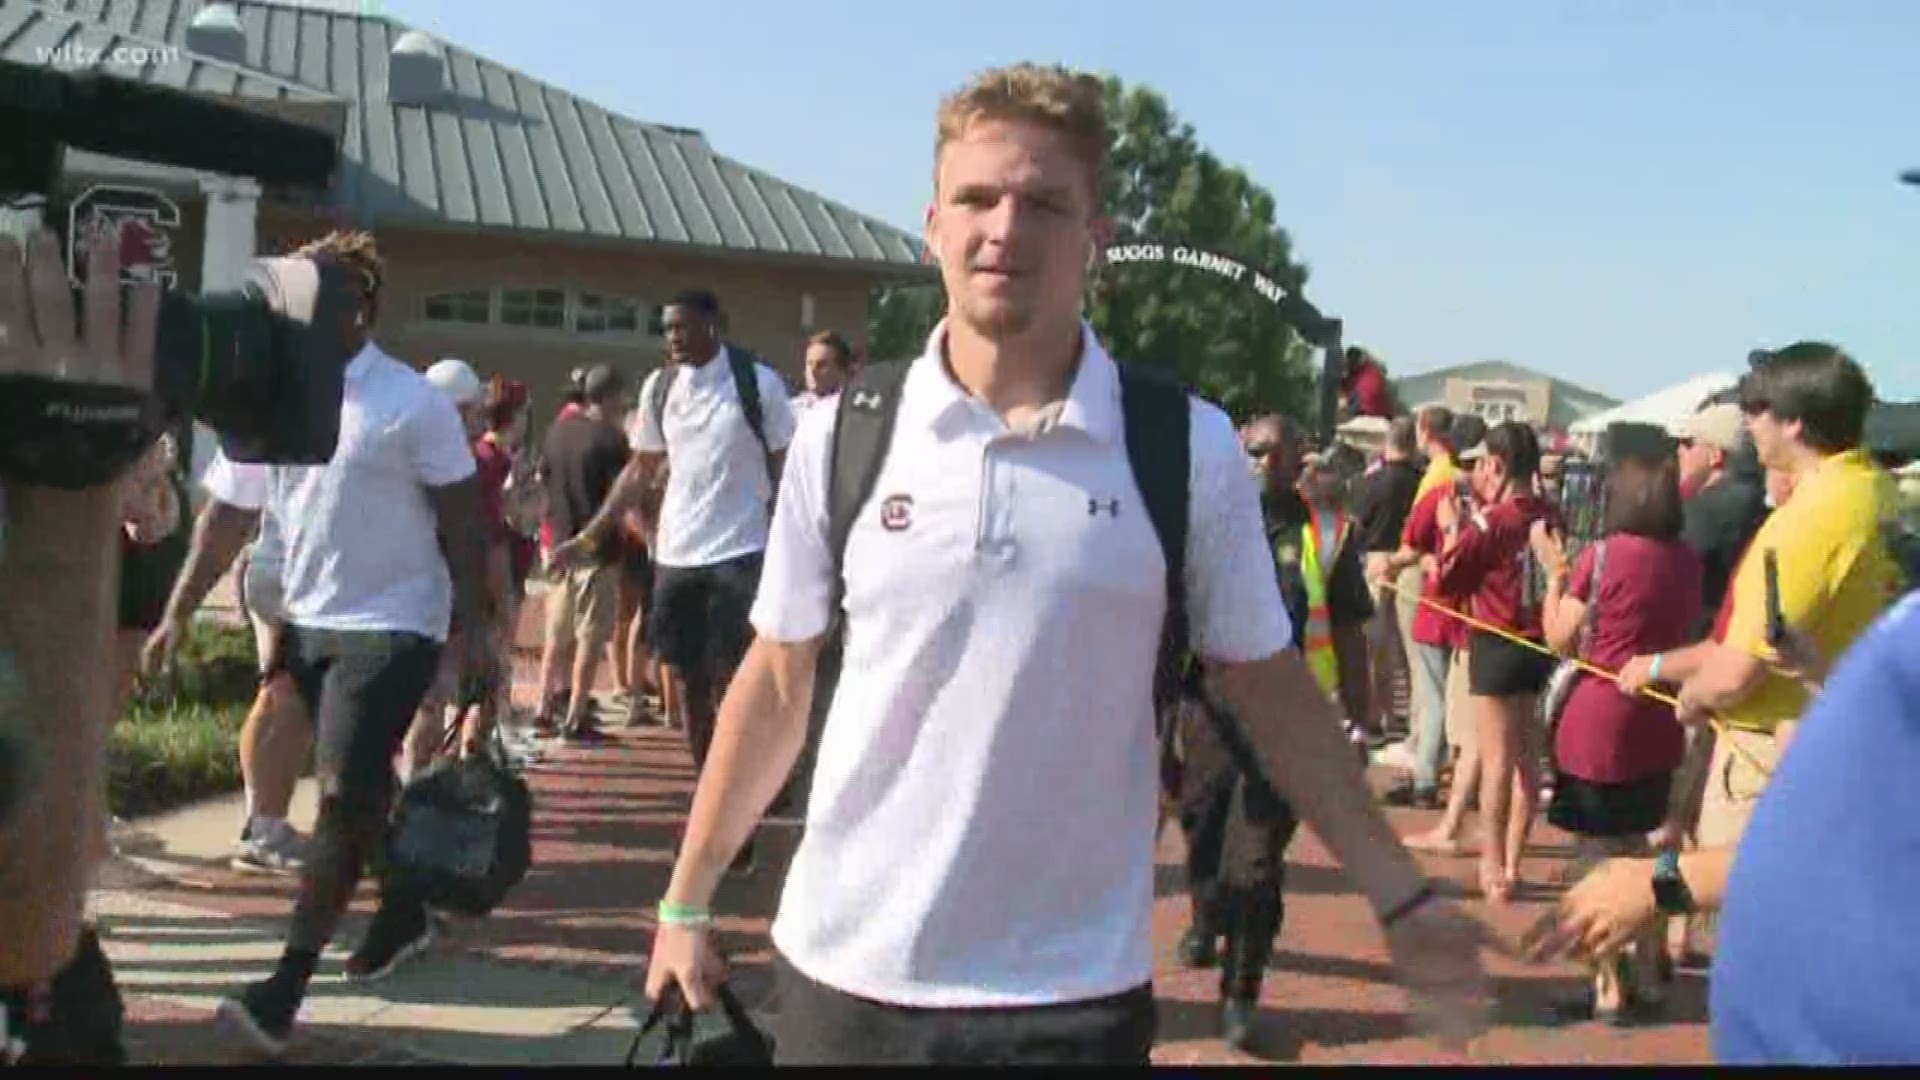 News19 caught up with the mother and father of USC freshman quarterback Ryan Hilinski who made his debut against Charleston Southern.